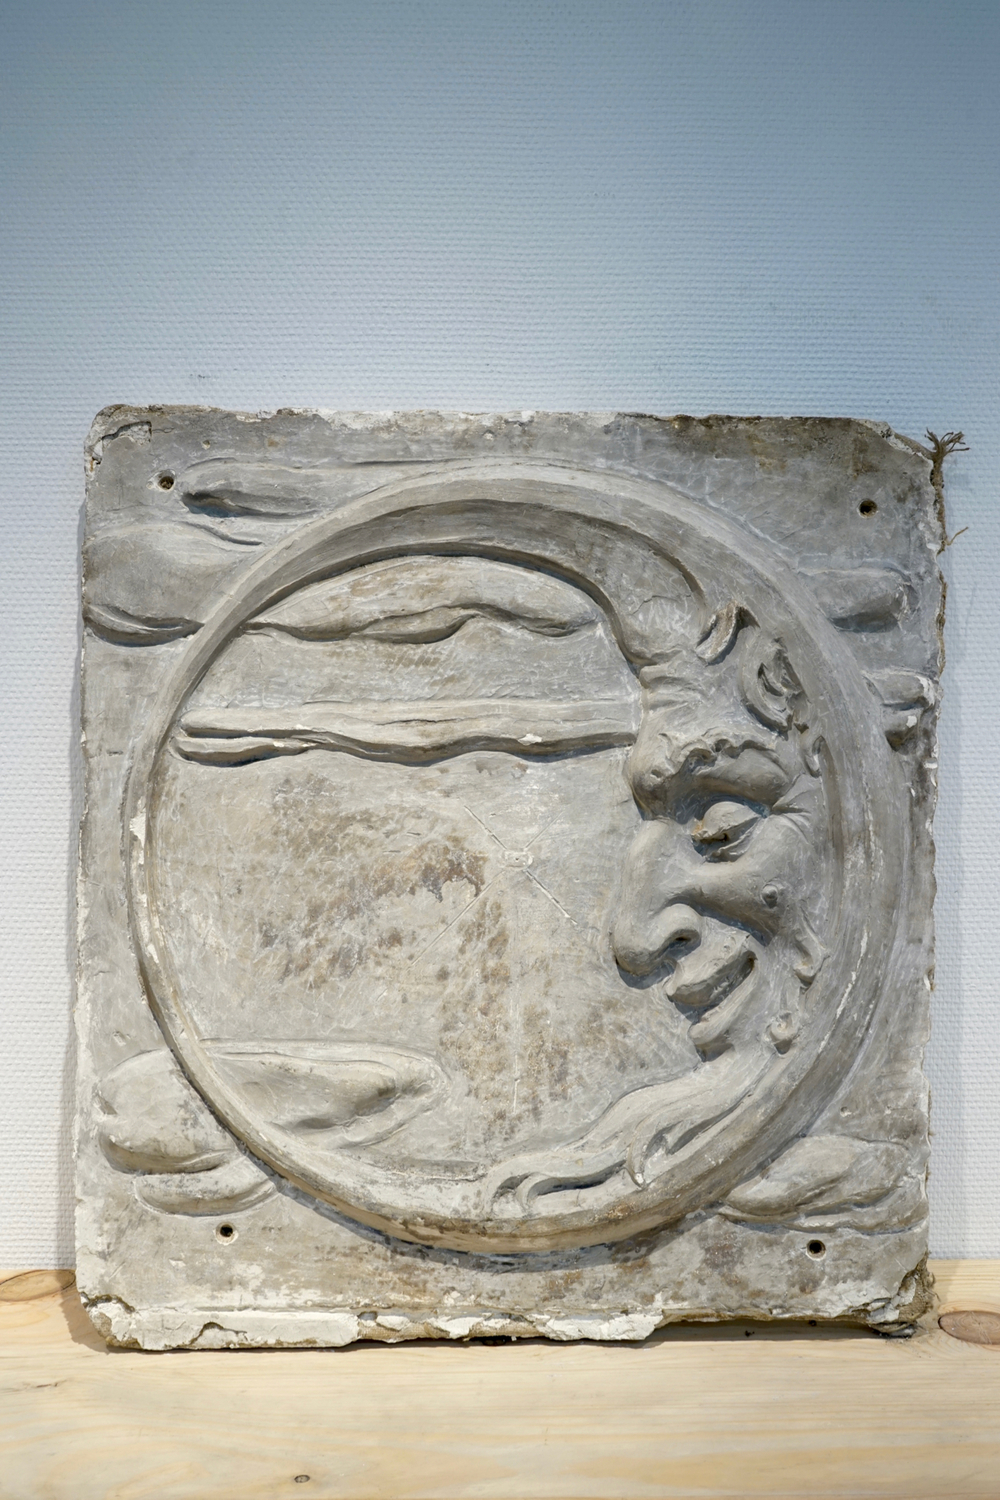 A plaster cast of a brewery advertising sign depicting the moon, 19/20th C., Bruges